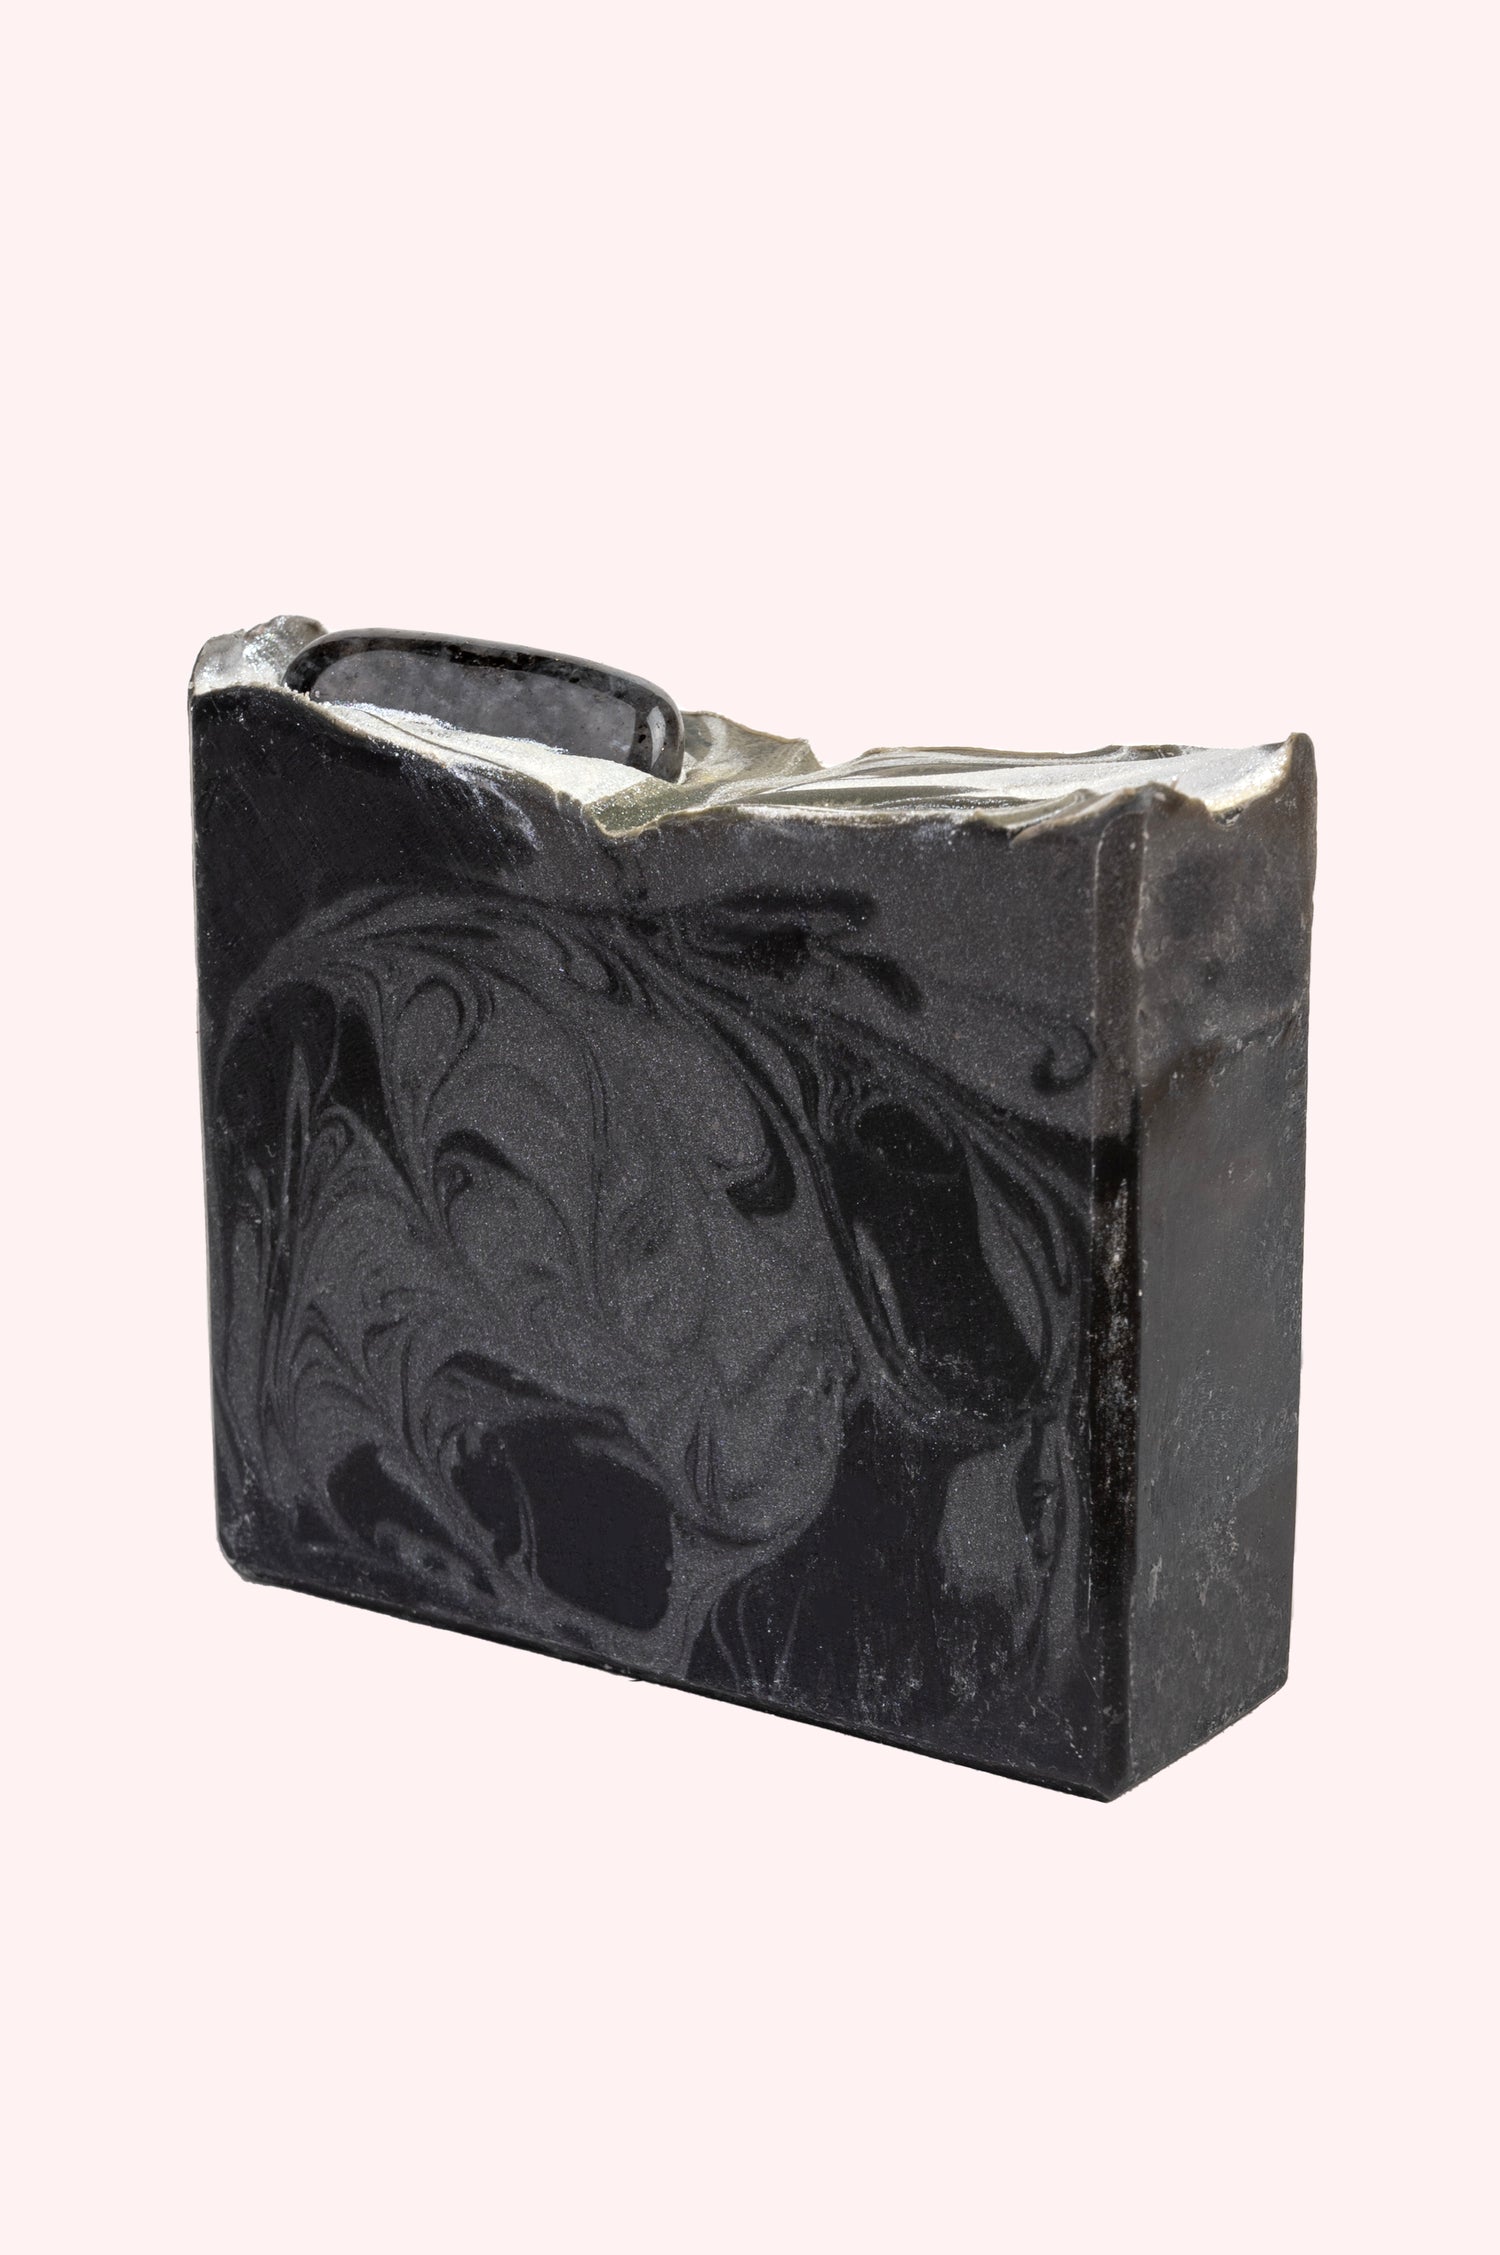 LILITH &quot;The Dark Mother&quot; Artisan Soap